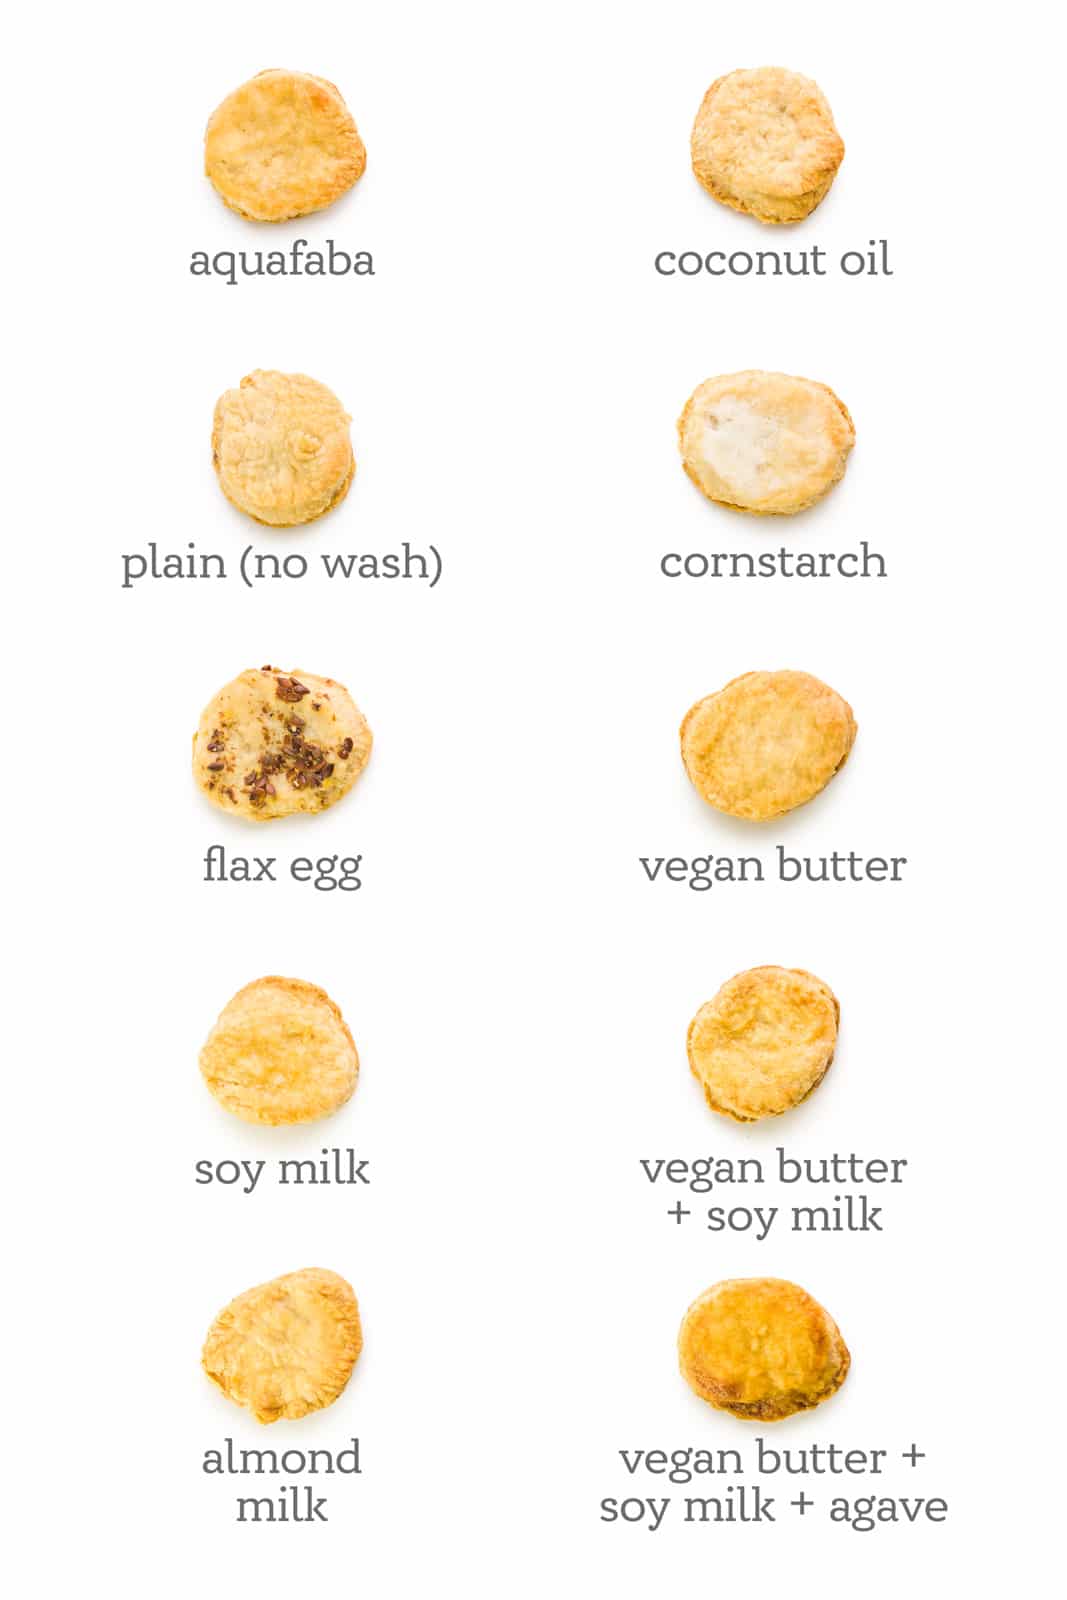 Several pie crust rounds are on a white counter. Under each one is a label indicating the type of vegan egg wash used. These include, "aguafaba, coconut oil, plain, cornstarch, flax seed, vegan butter, soy milk, vegan butter + soy milk, almond milk, and vegan butter + soy milk + agave."